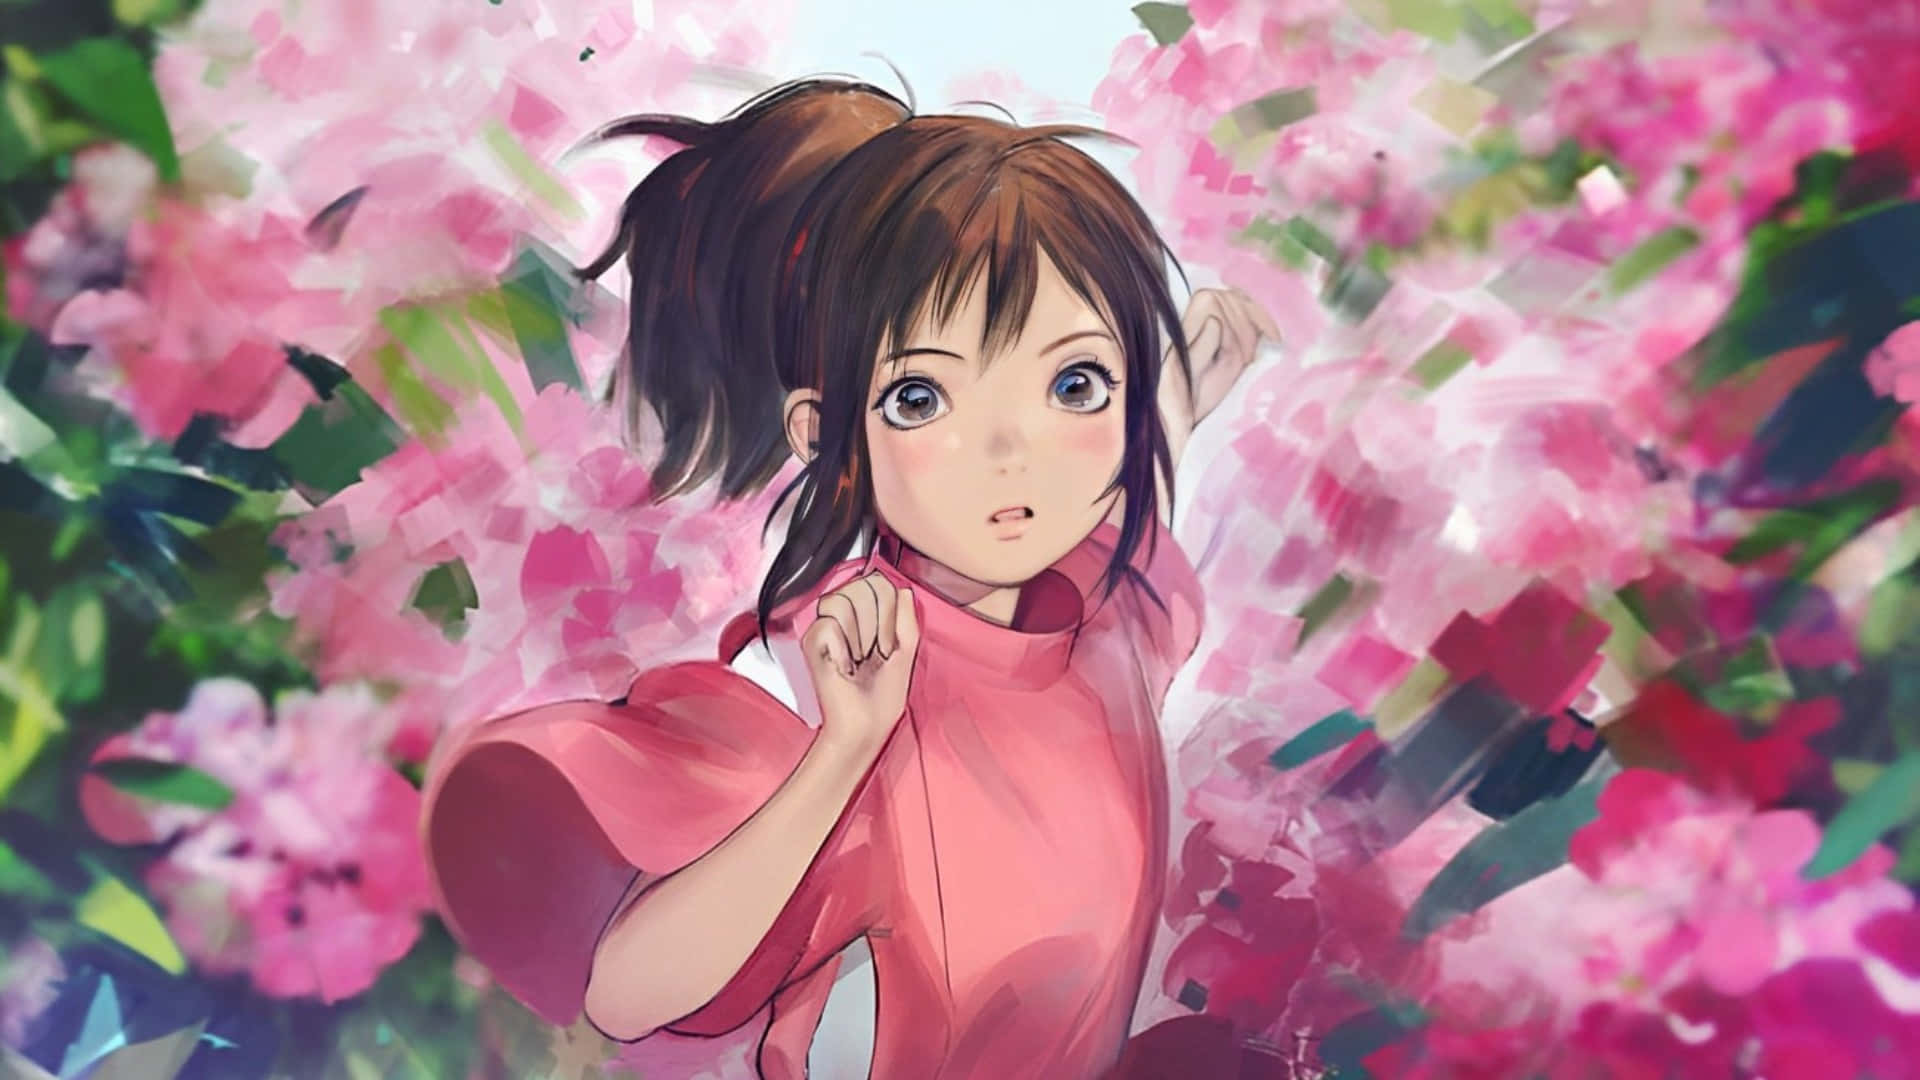 Chihiro Surroundedby Blooms Wallpaper